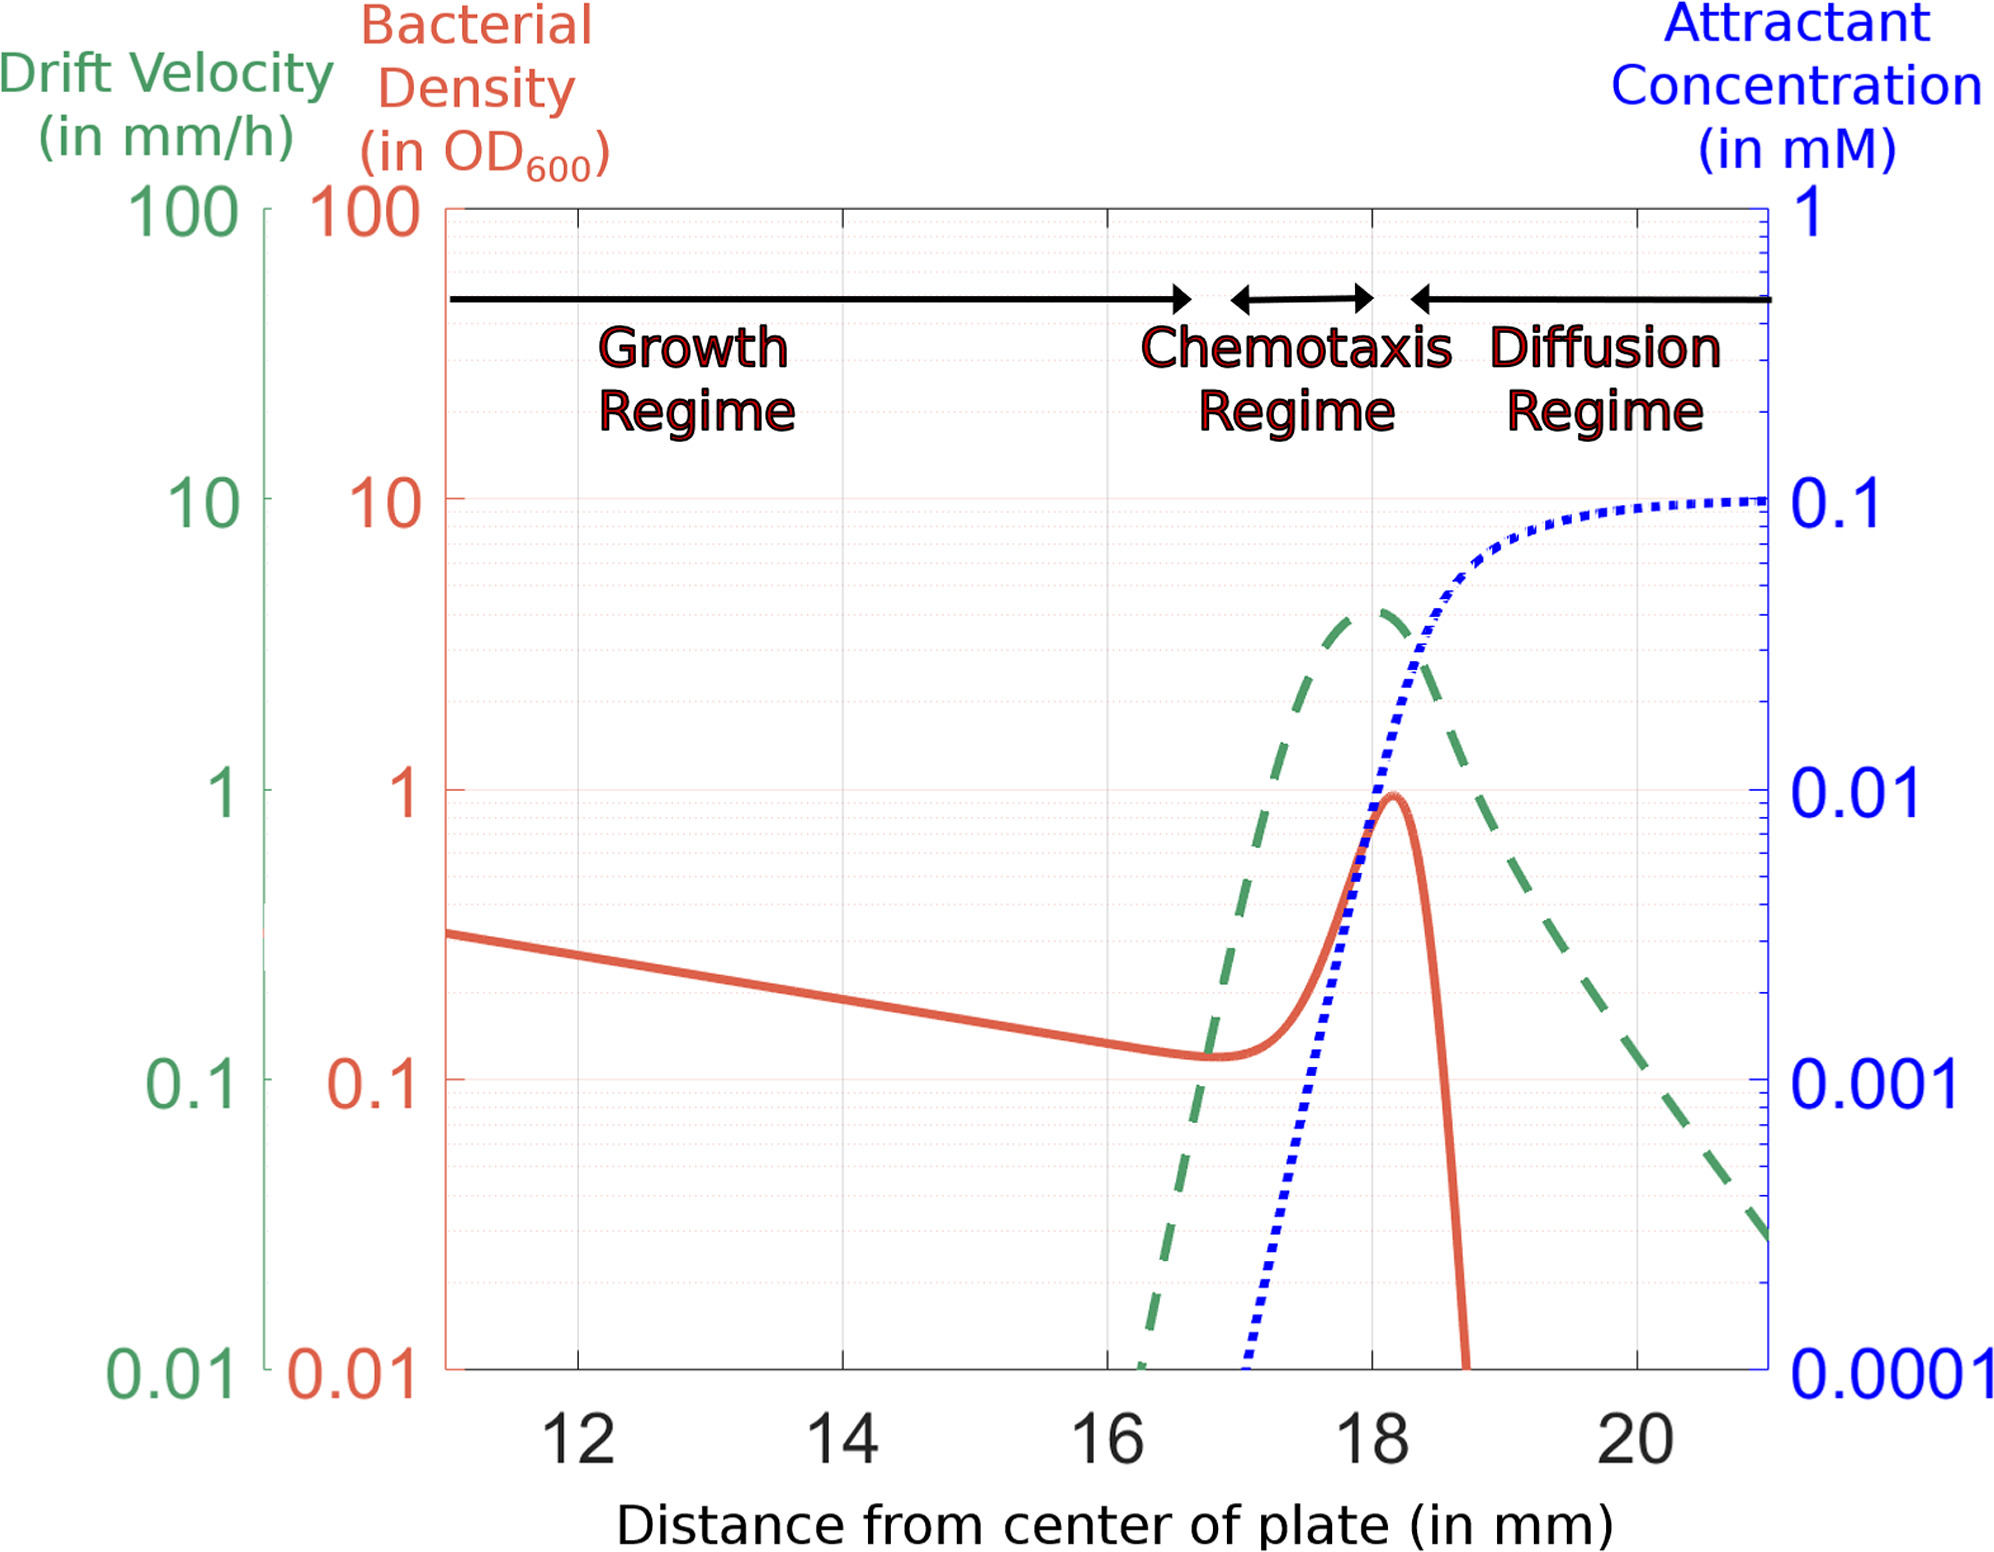 Population-Level Bacterial Chemotaxis